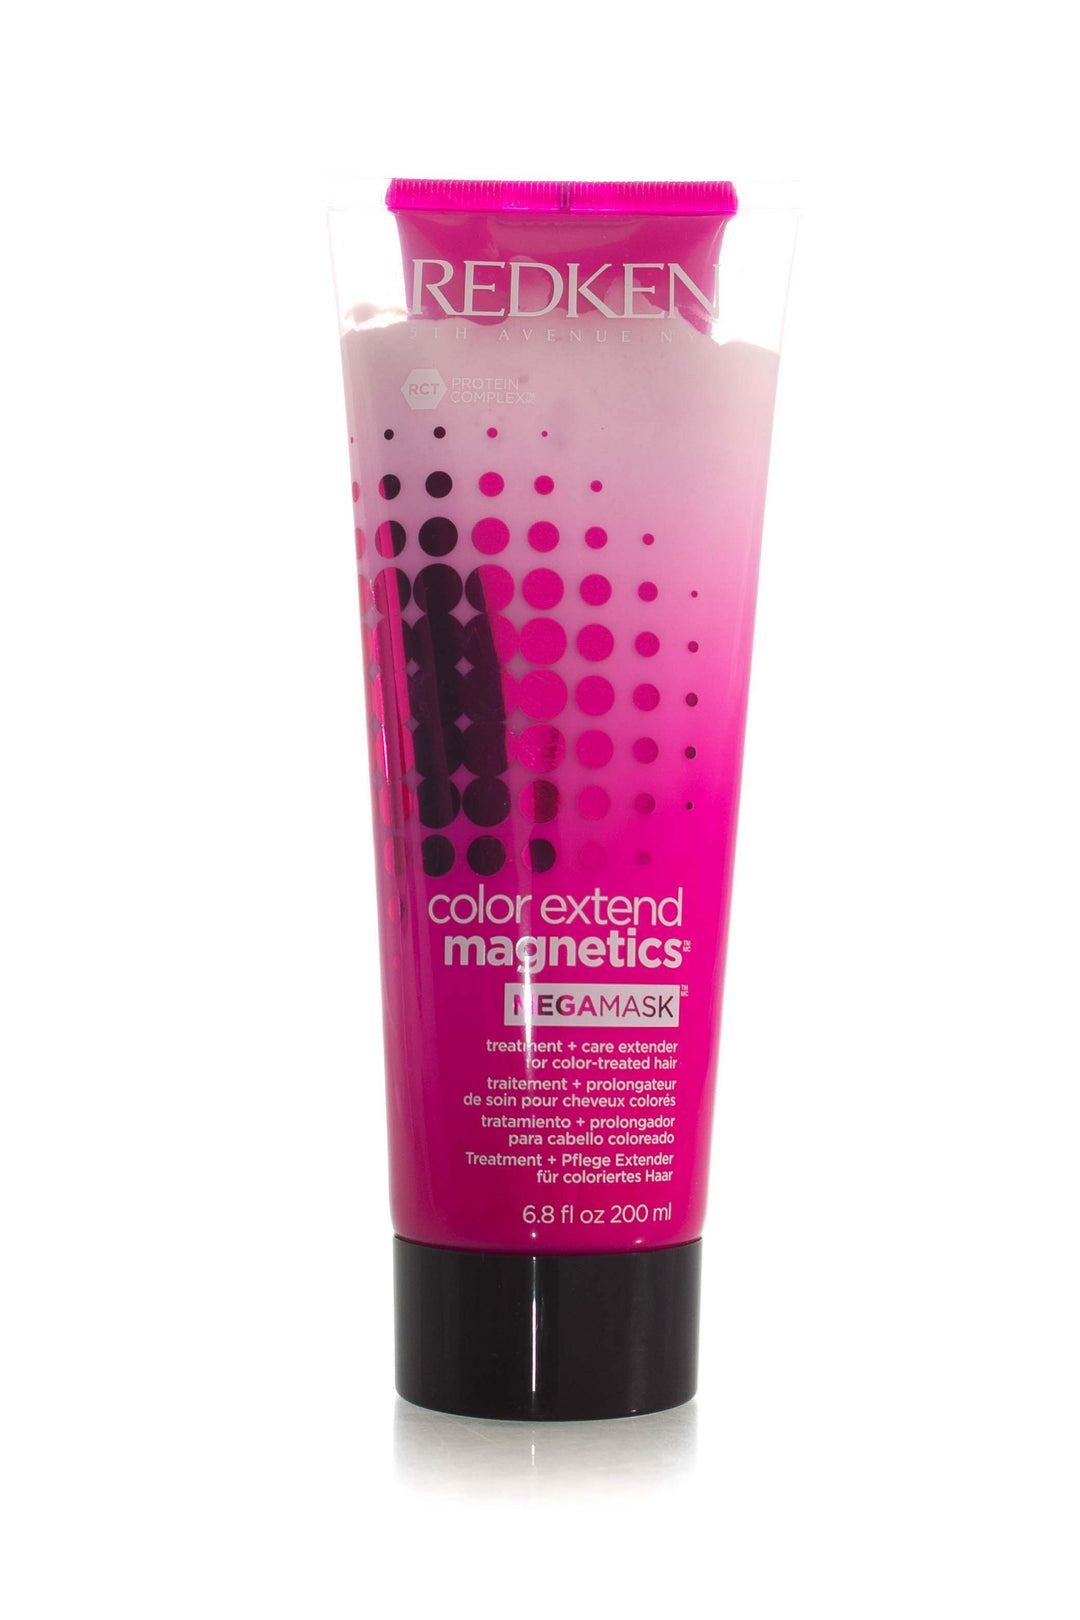 Hair mask for colour treated hair  A dual chamber mega hair mask intended to provide deep, intense conditioning, and a care extender to provide ultimate vibrancy that lasts up to 3 washes.